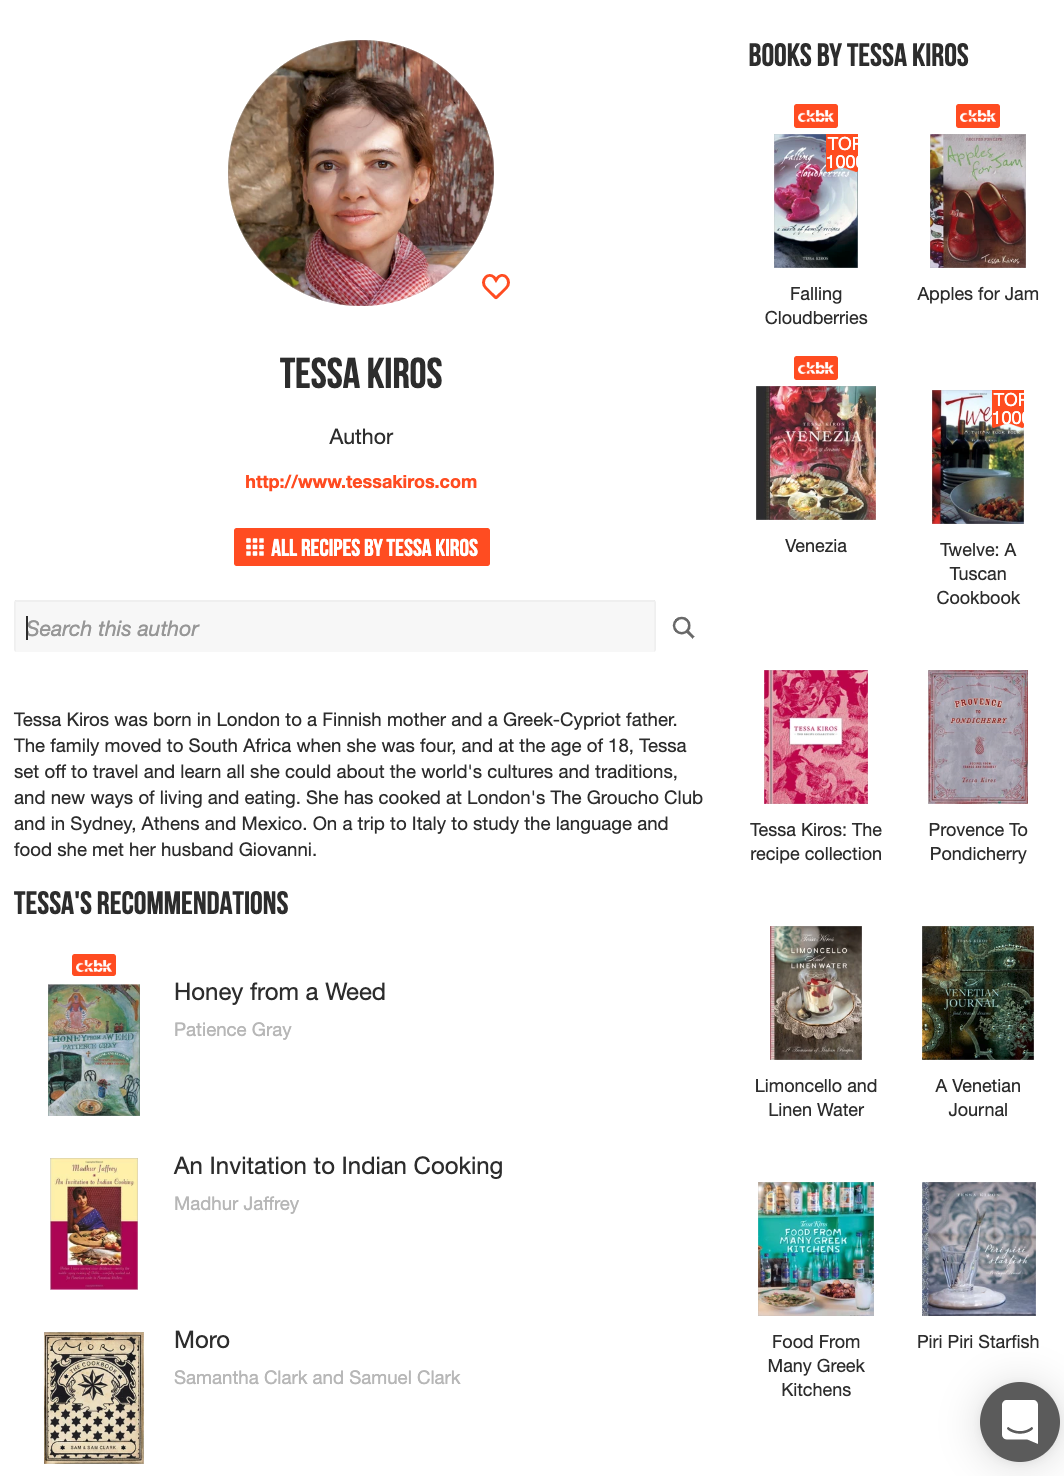 Tessa Kiros’ author page with titles she’s authored and books she recommends